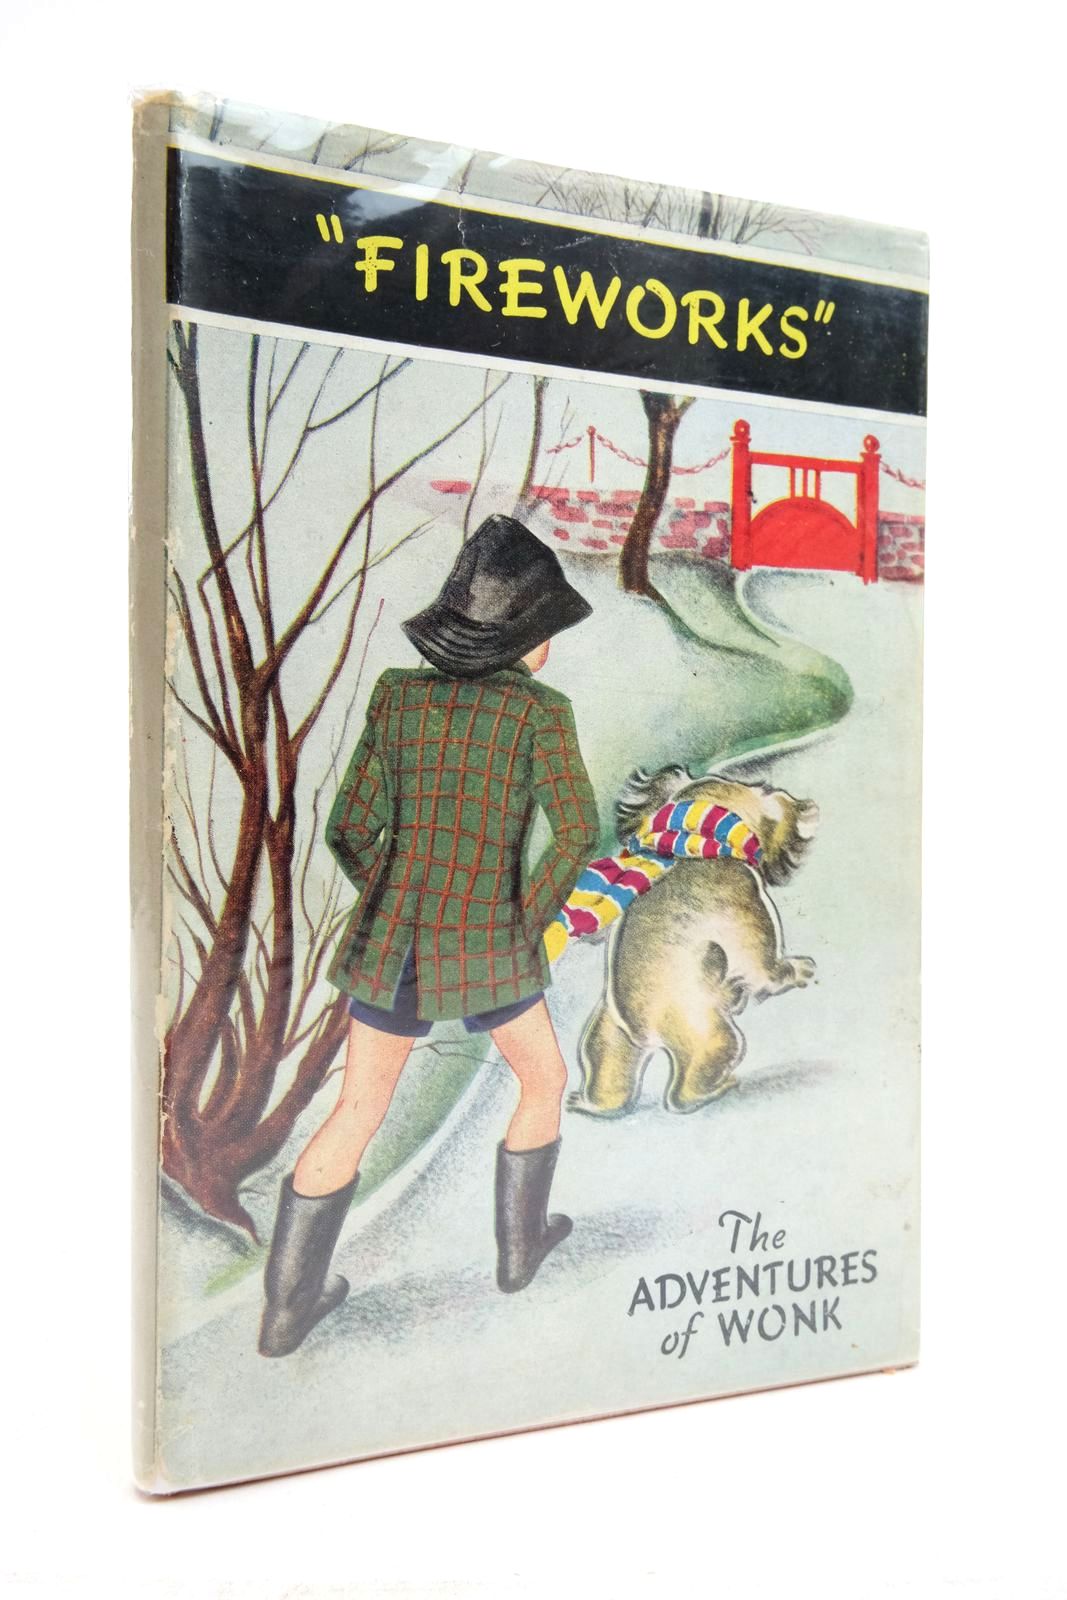 Photo of THE ADVENTURES OF WONK - FIREWORKS written by Levy, Muriel illustrated by Kiddell-Monroe, Joan published by Wills &amp; Hepworth Ltd. (STOCK CODE: 2136915)  for sale by Stella & Rose's Books